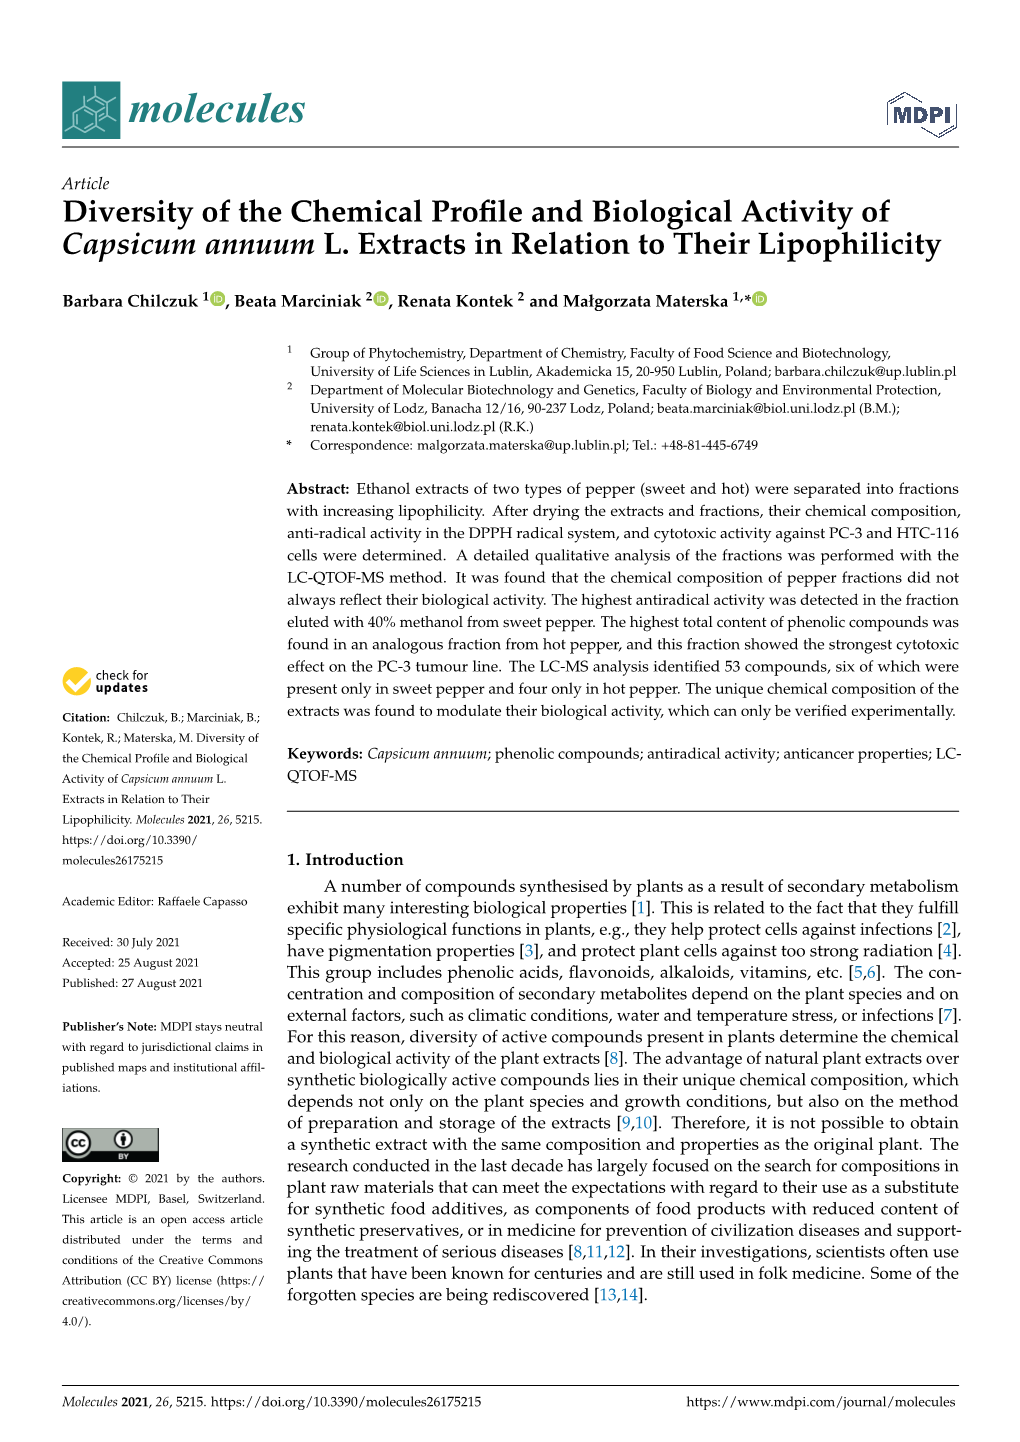 Diversity of the Chemical Profile and Biological Activity of Capsicum